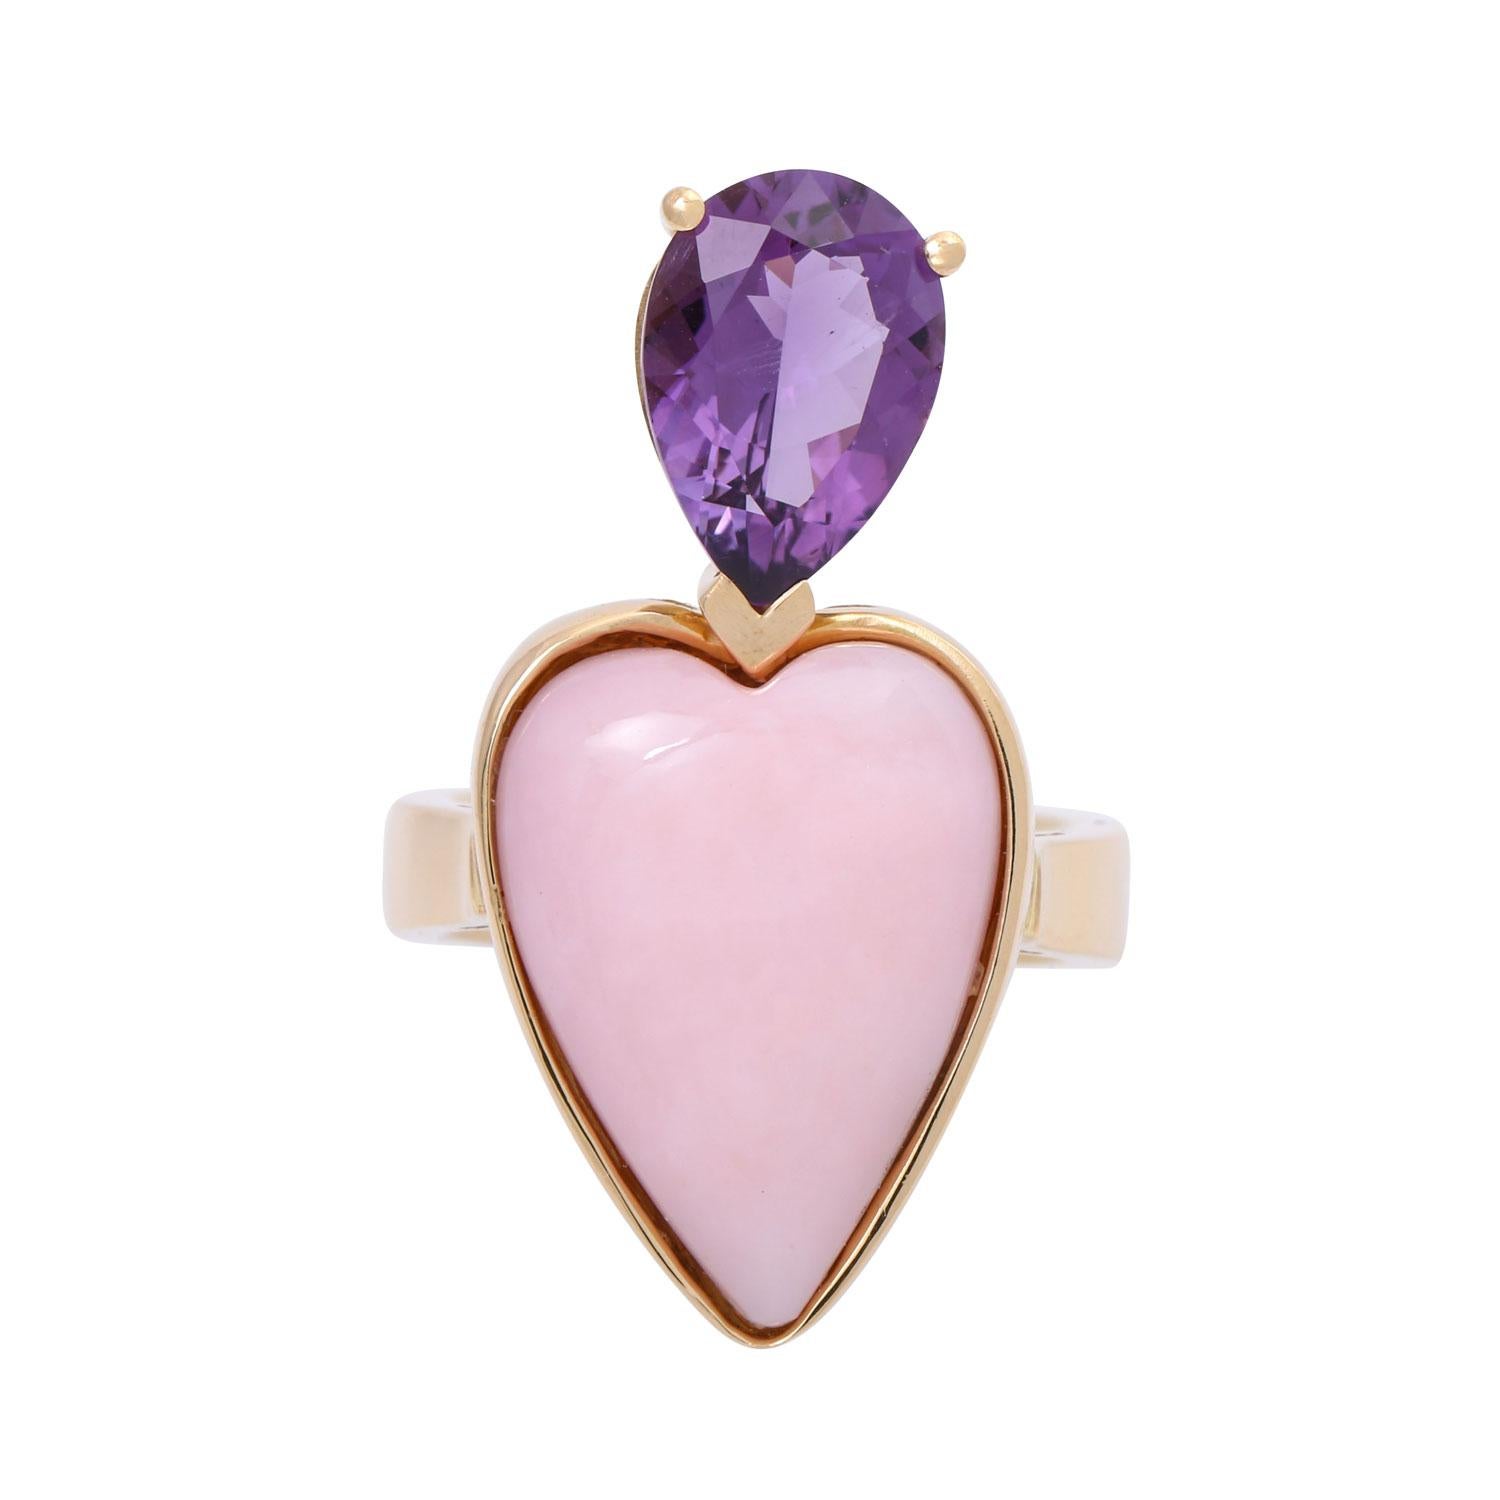 each with heart-cut Andean opal and pear-cut amethyst, GG 18K, RW: 58, 18.4g, earrings L: 5cm, 17.1g, solid workmanship. Purchase receipts from 2009 attached.
